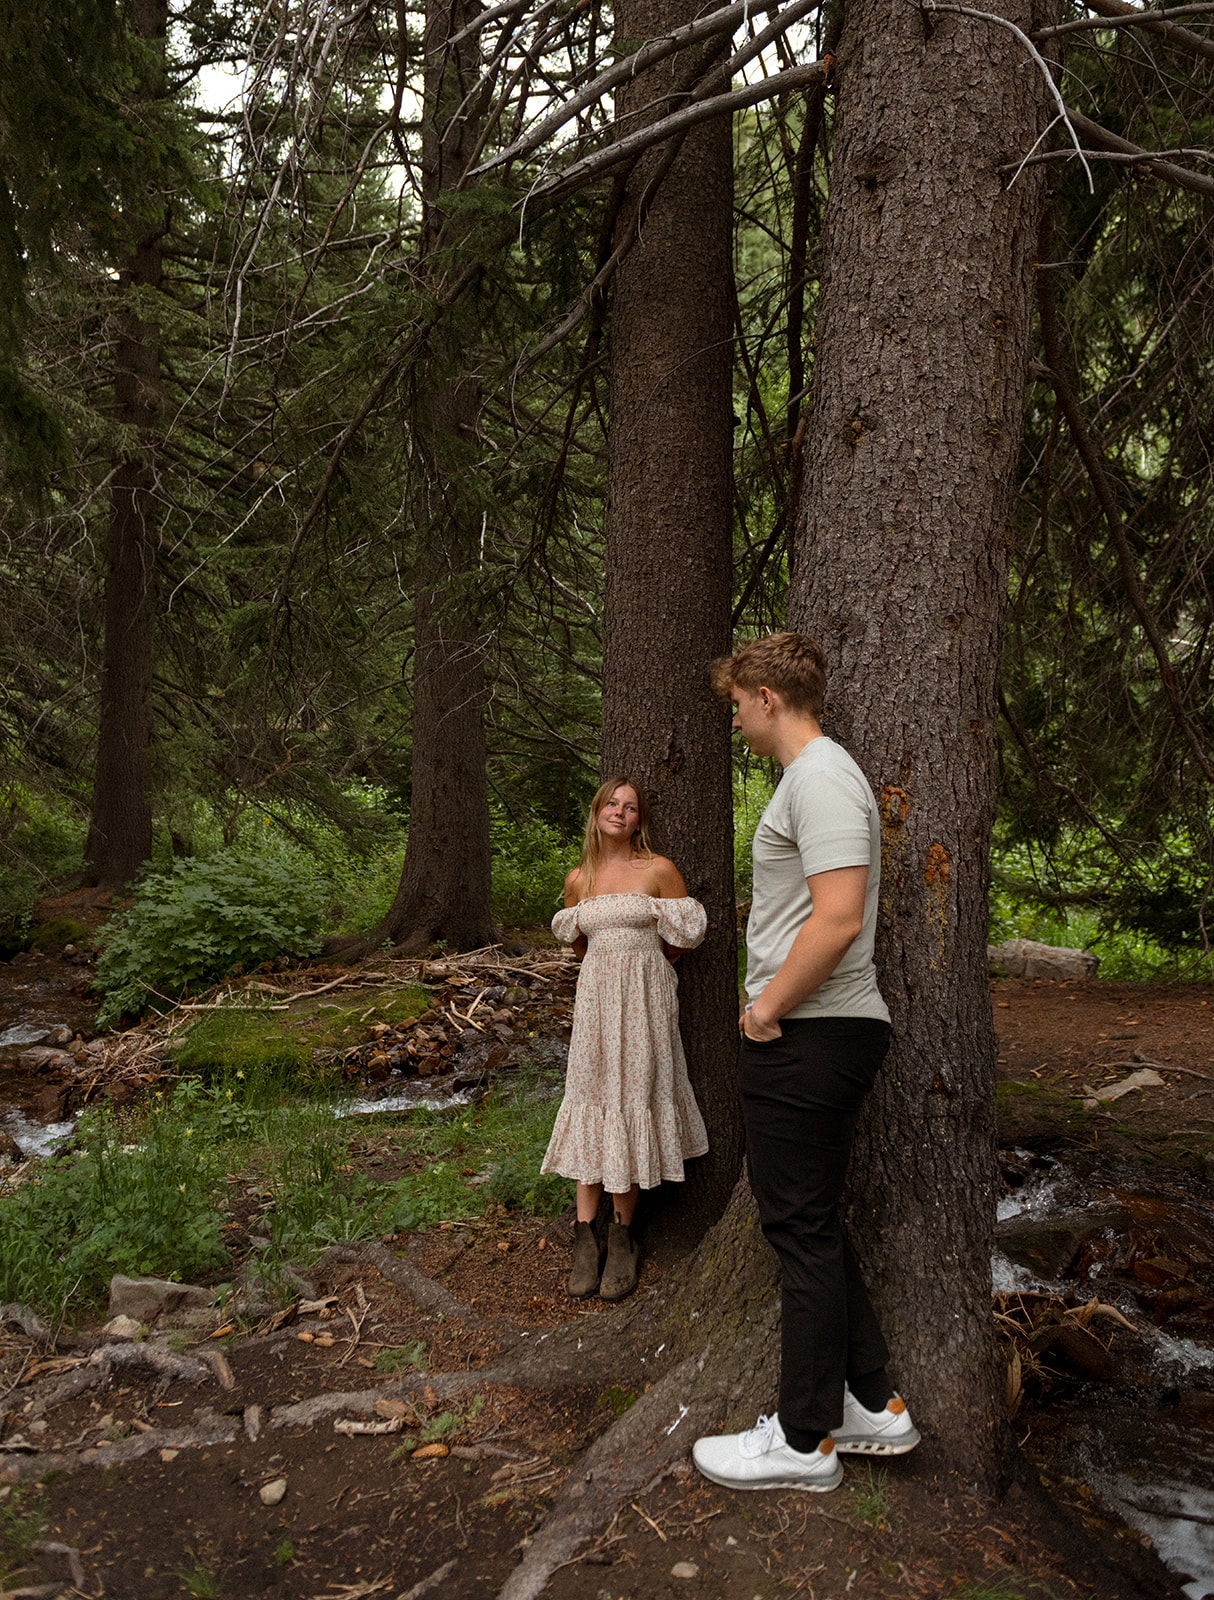 Magical and romantic evening in the Utah mountains, surrounded by the pines